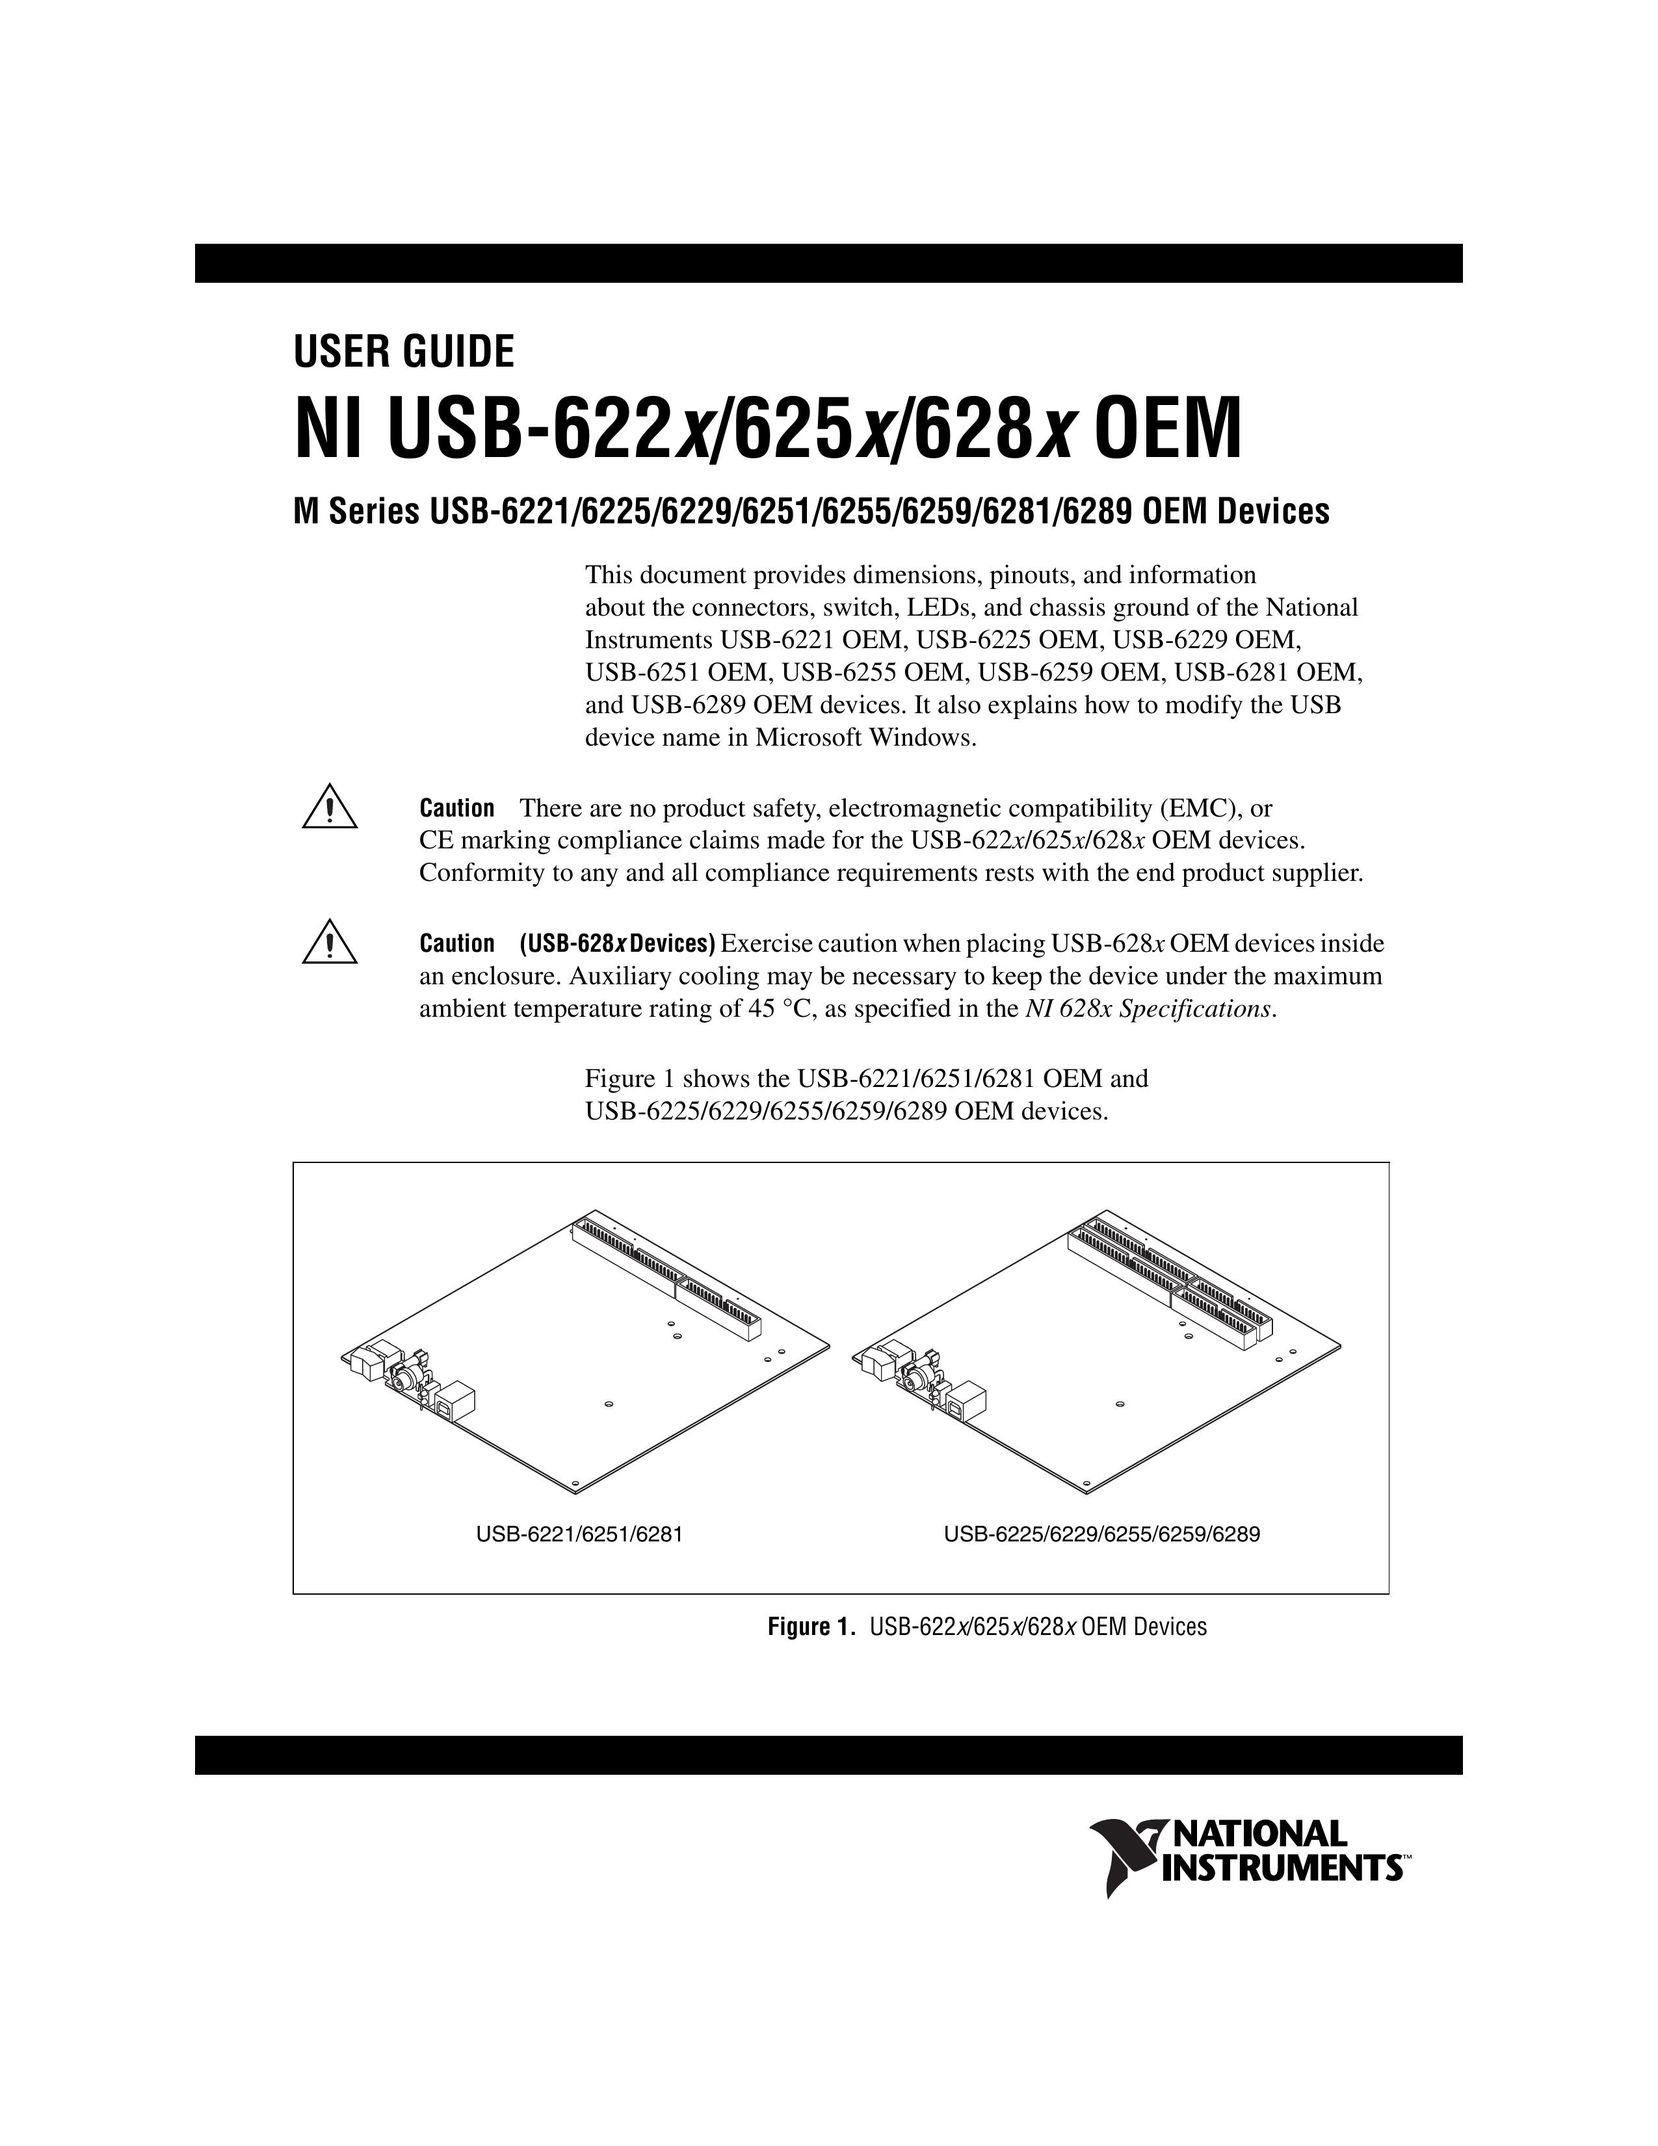 National Instruments 625x Computer Drive User Manual